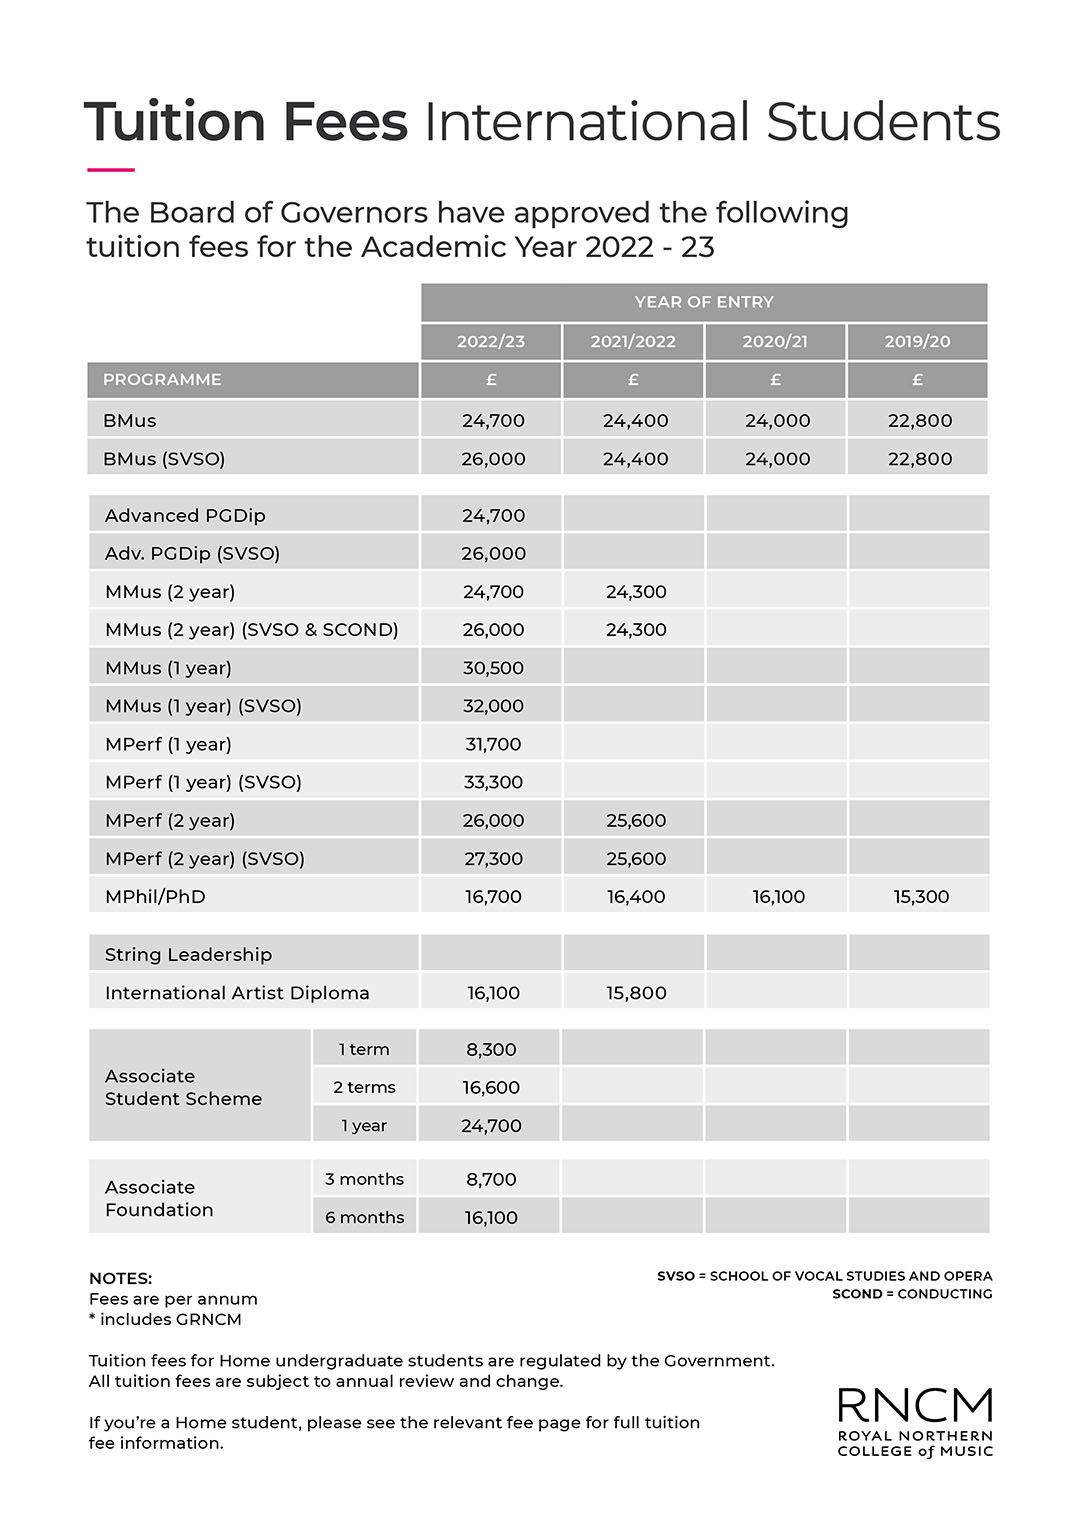 Image of International Tuition Fees